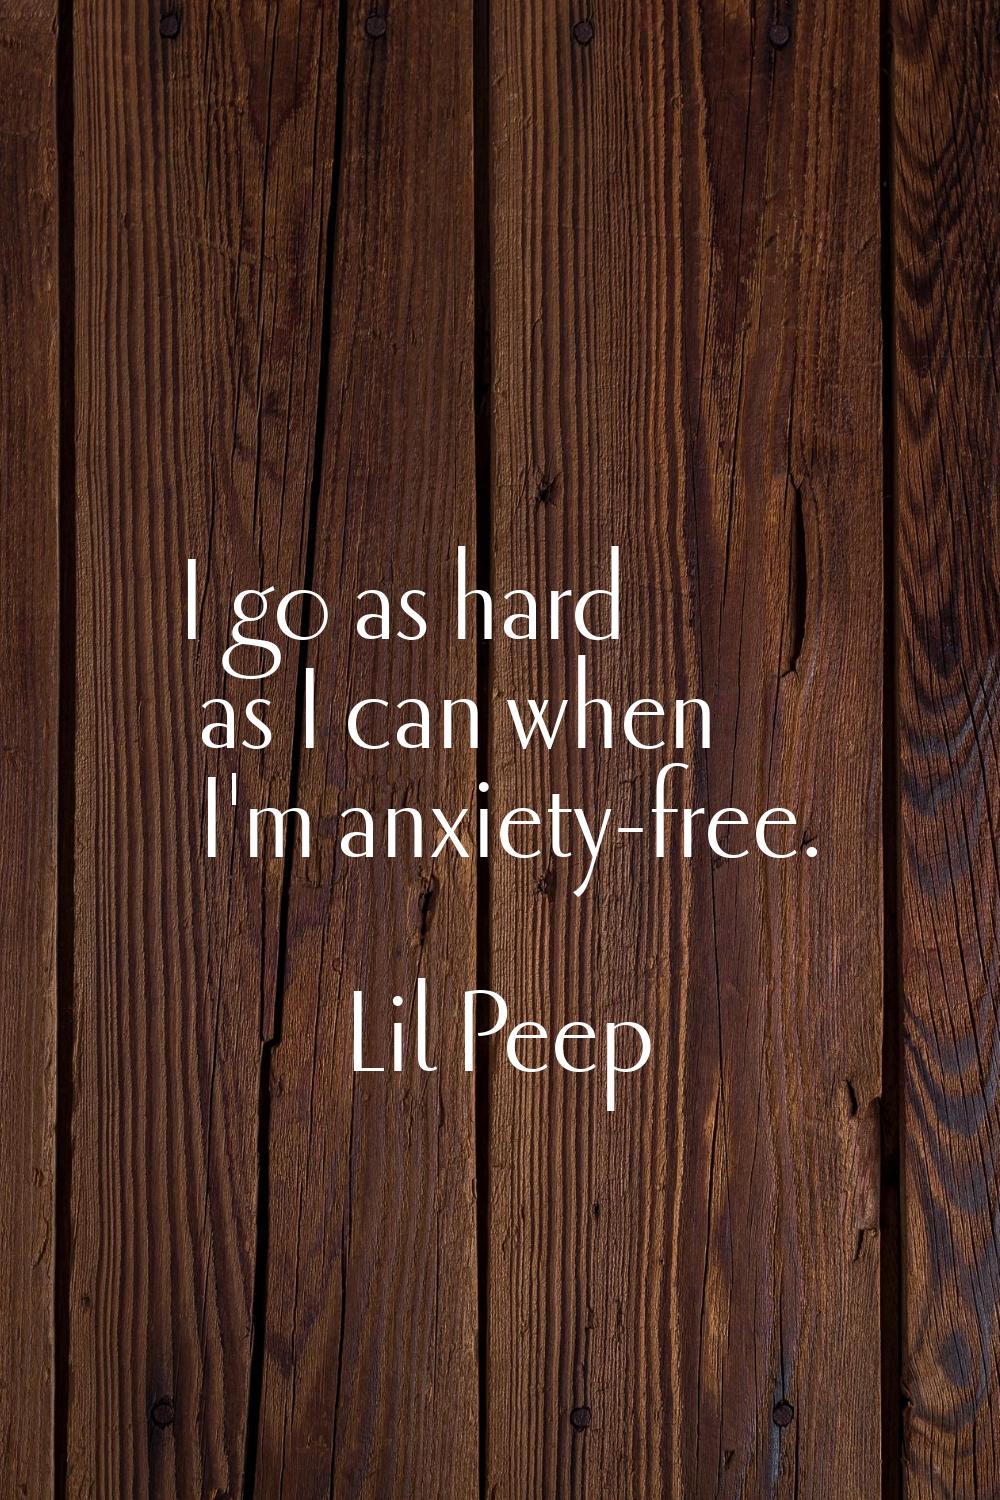 I go as hard as I can when I'm anxiety-free.